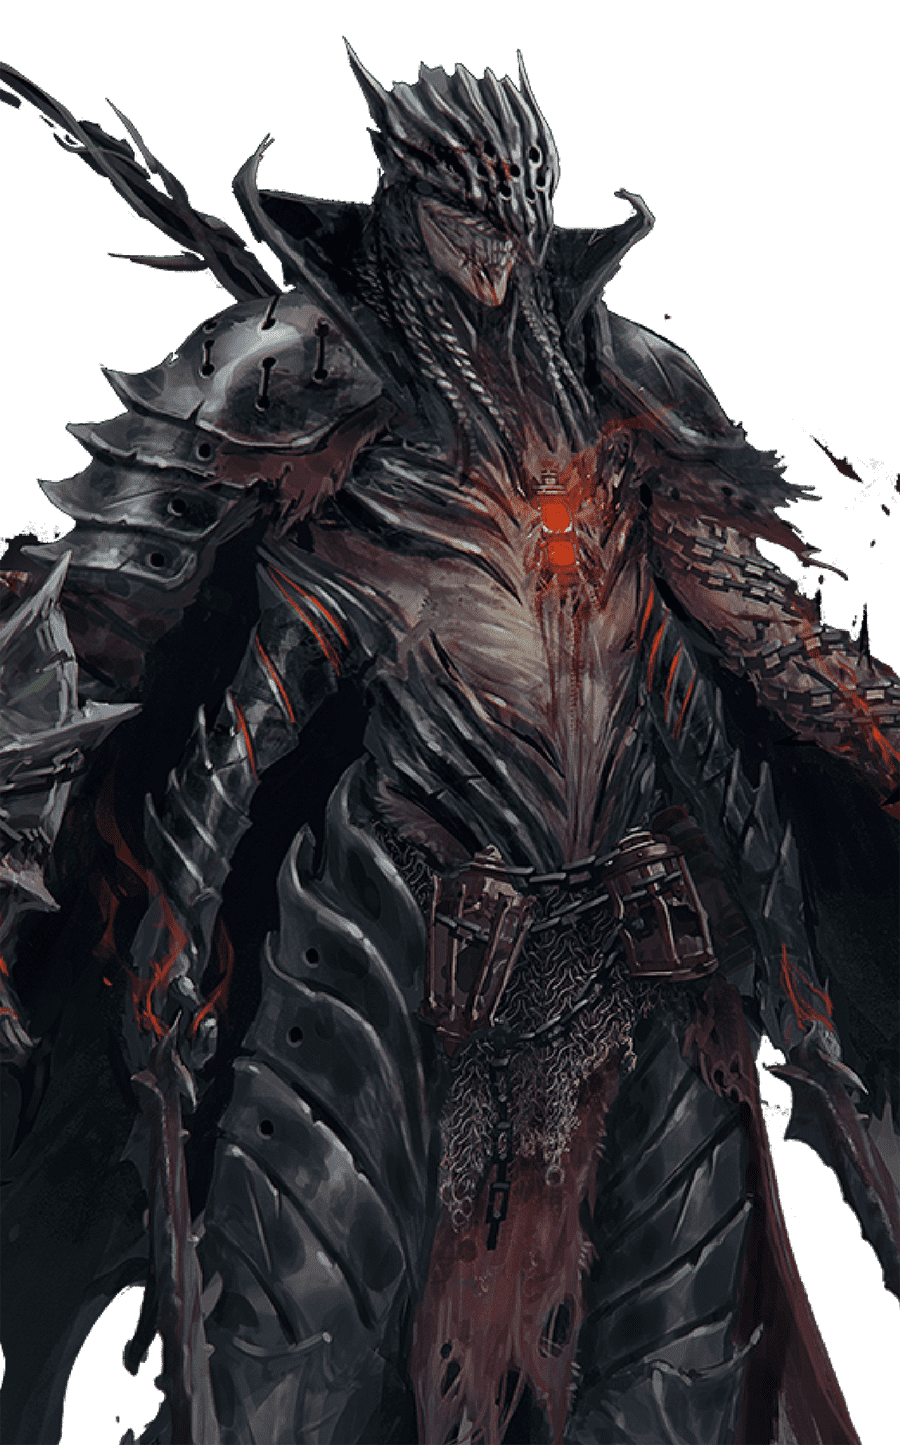 The enemy champion corrupted by the gods and have joined forces with the Lords of the Fallen which the Crusader must face. In the world of The Lords of the Fallen